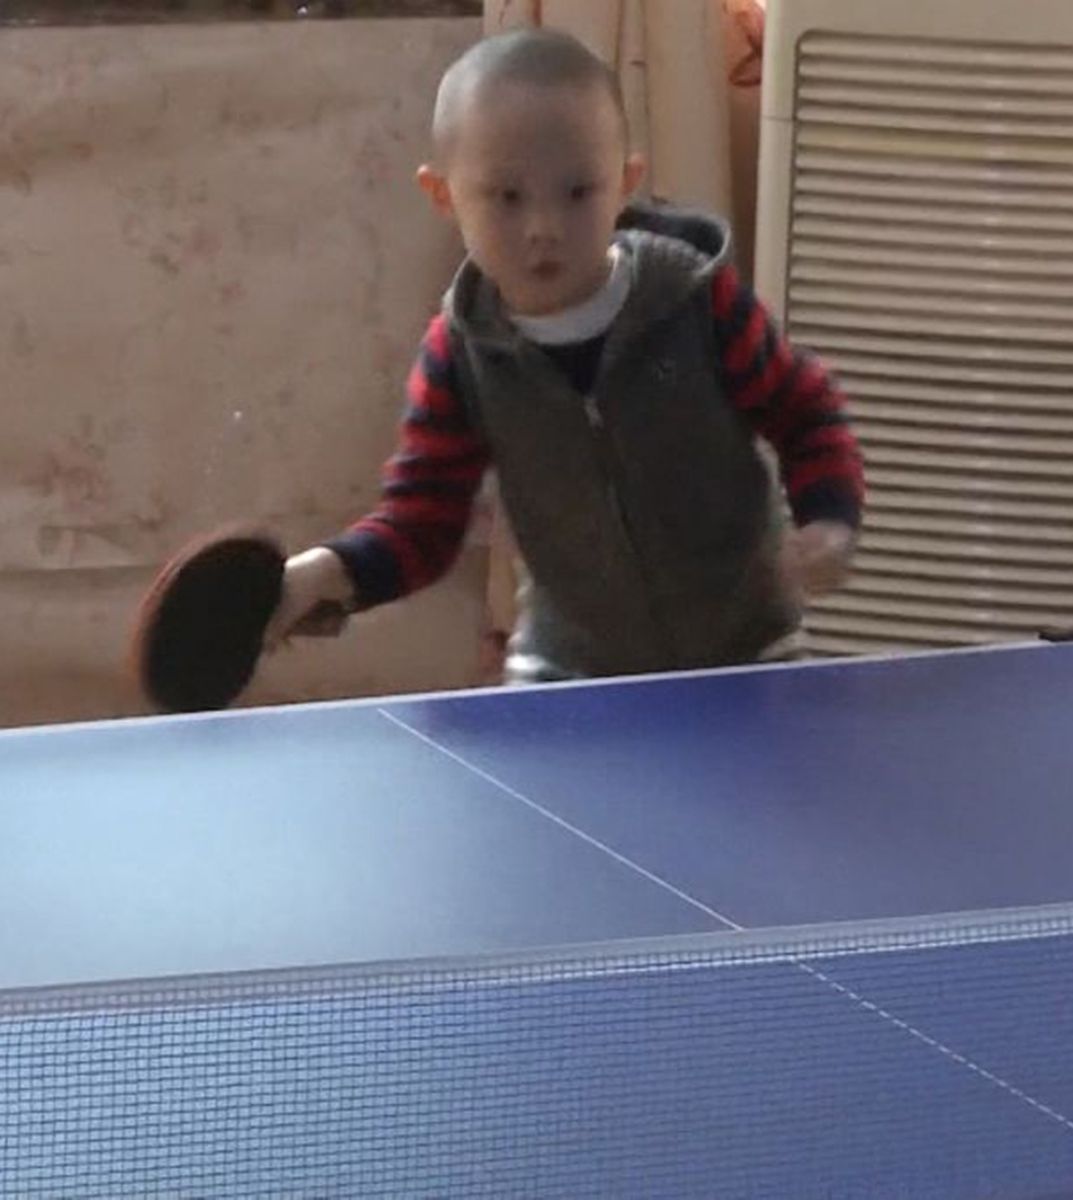 Toddler’s Ping Pong Skills Leaves The Internet Amazed 2